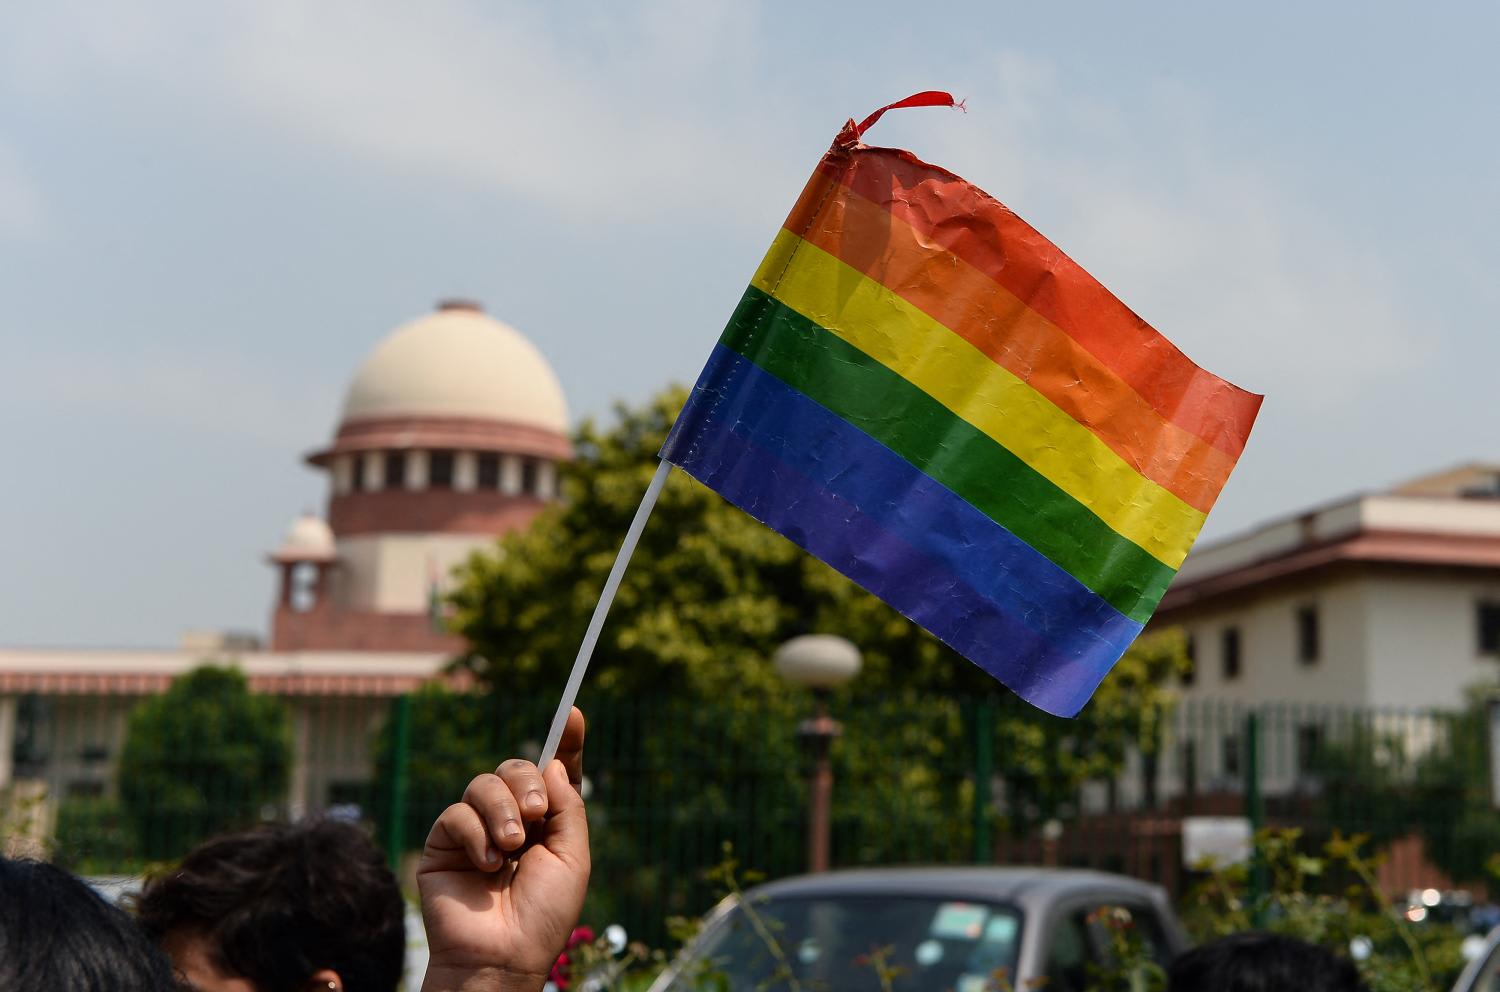 An Indian member of the lesbian, gay, bisexual, transgender (LGBT) community waves a flag outside the Supreme Court building as crowds gathered to celebrate the decision to strike down the colonial-era ban on gay sex in New Delhi on Sept 6, 2018.